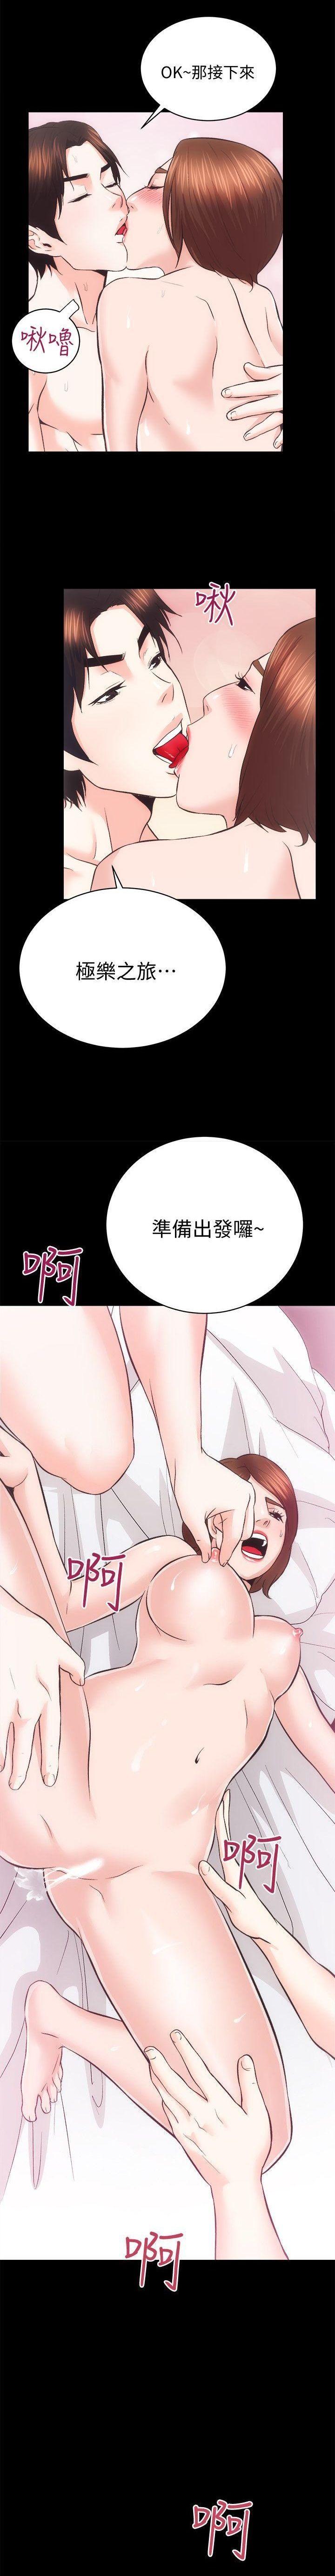 3some 性溢房屋 Chapter 21-25 Rough - Page 52